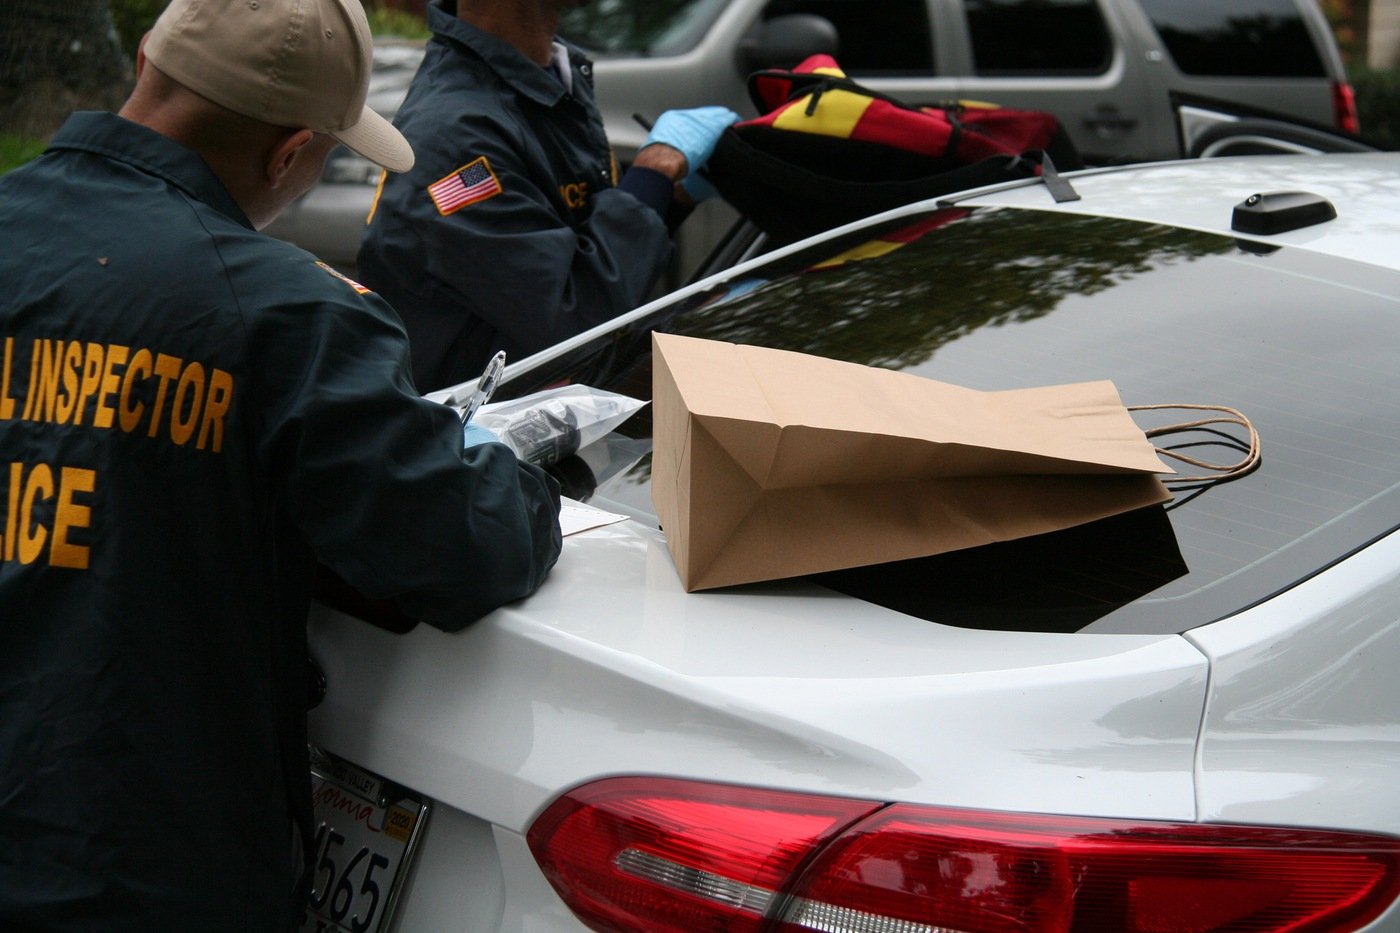 Members of the the Joint Criminal Opioid and Darknet Enforcement (J-CODE) team conduct a vehicle search in March 2019 in California as part of a Darknet drug investigation.